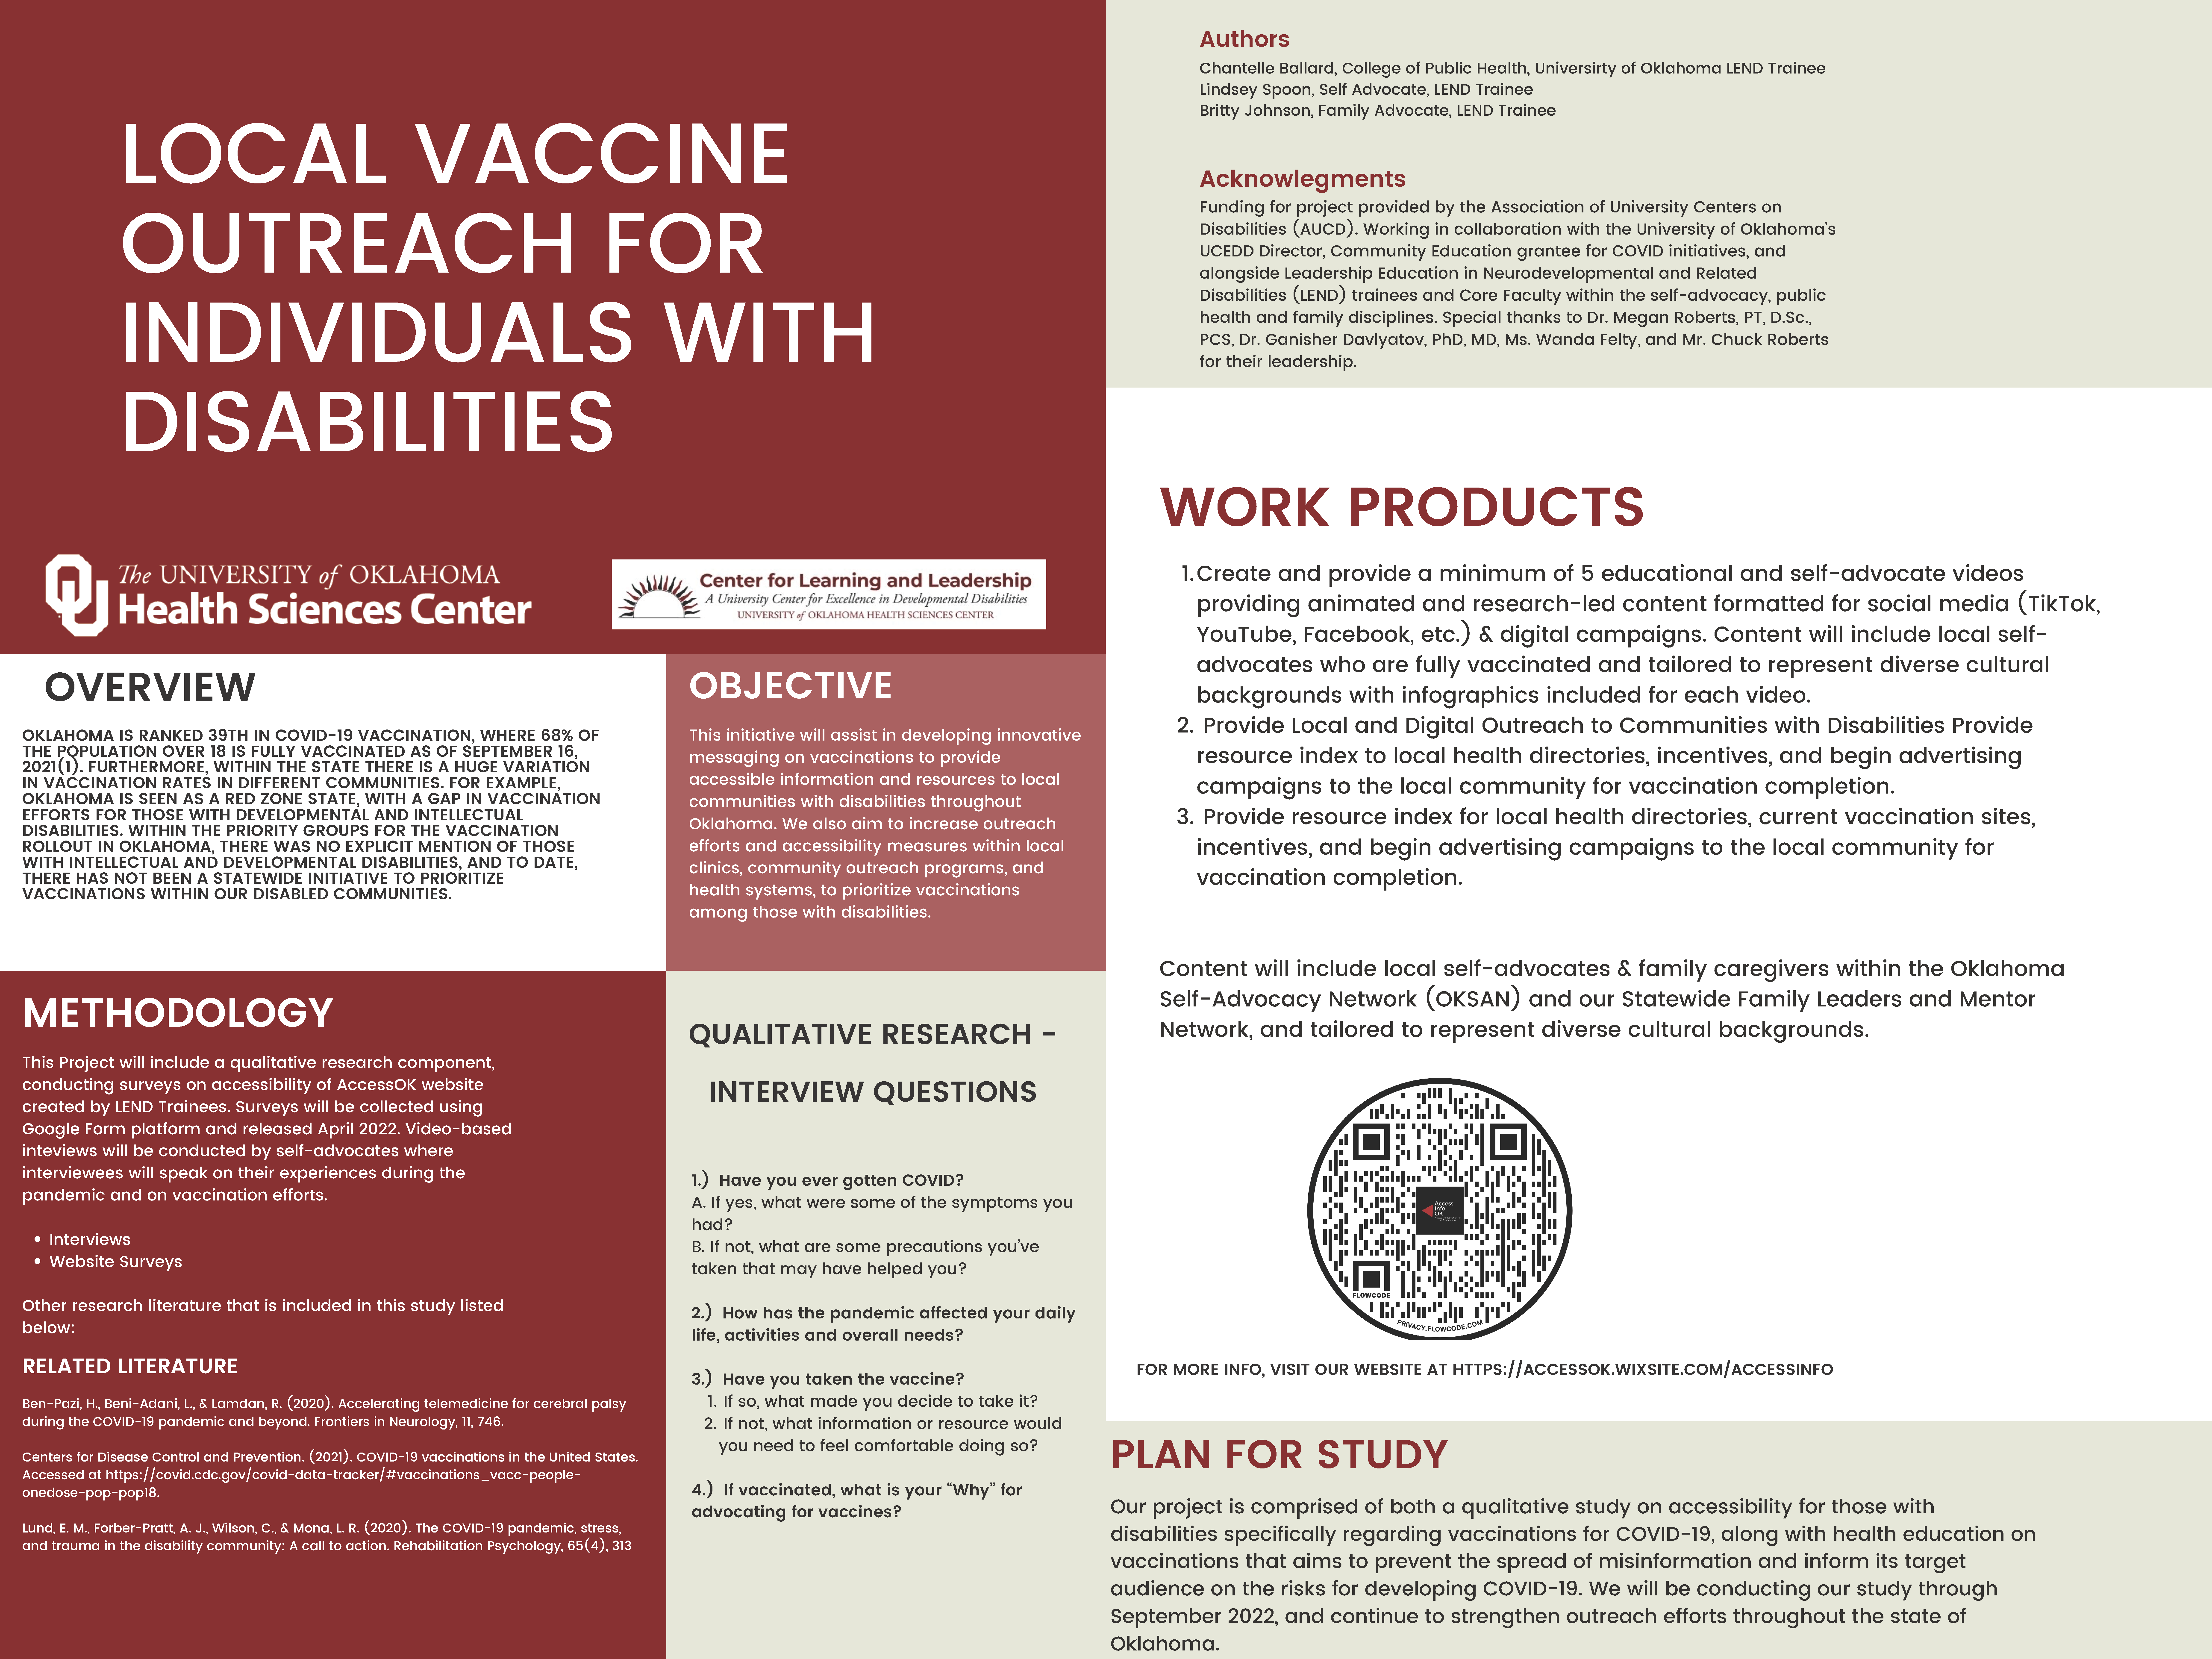 Local Vaccination Outreach for Individuals with Disabilities Poster